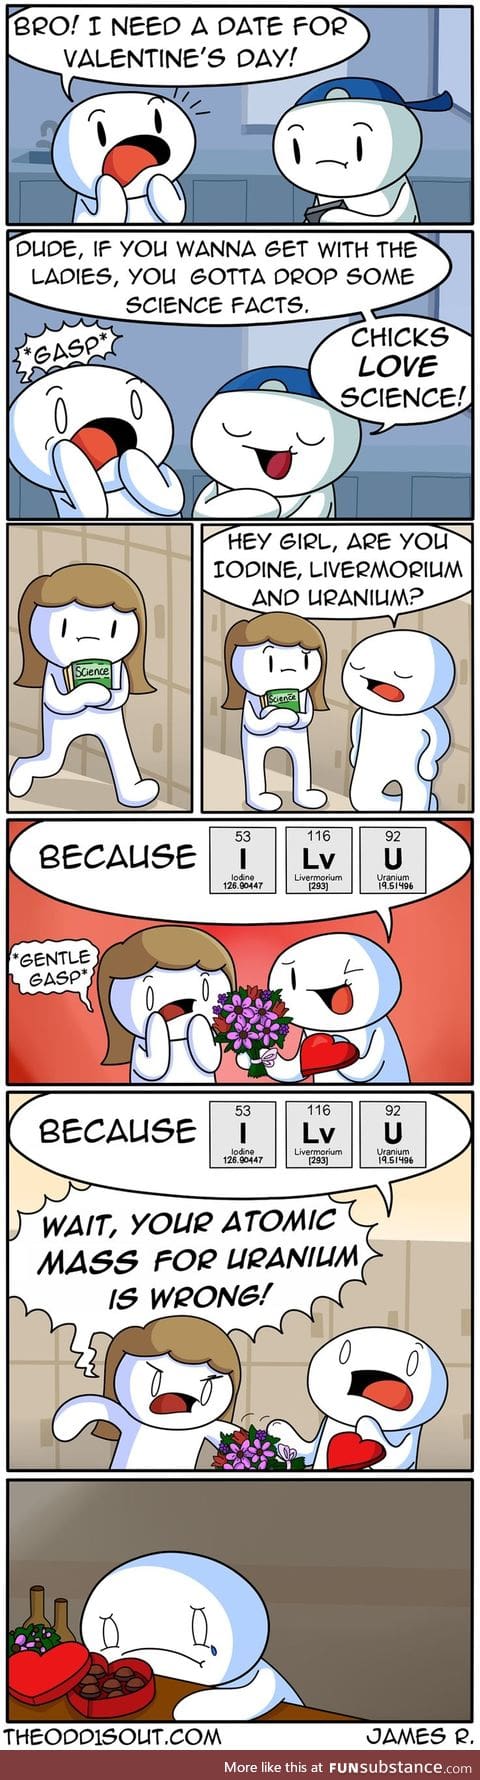 Daily Dose of Love #10- A Sad Love story by theodd1sout